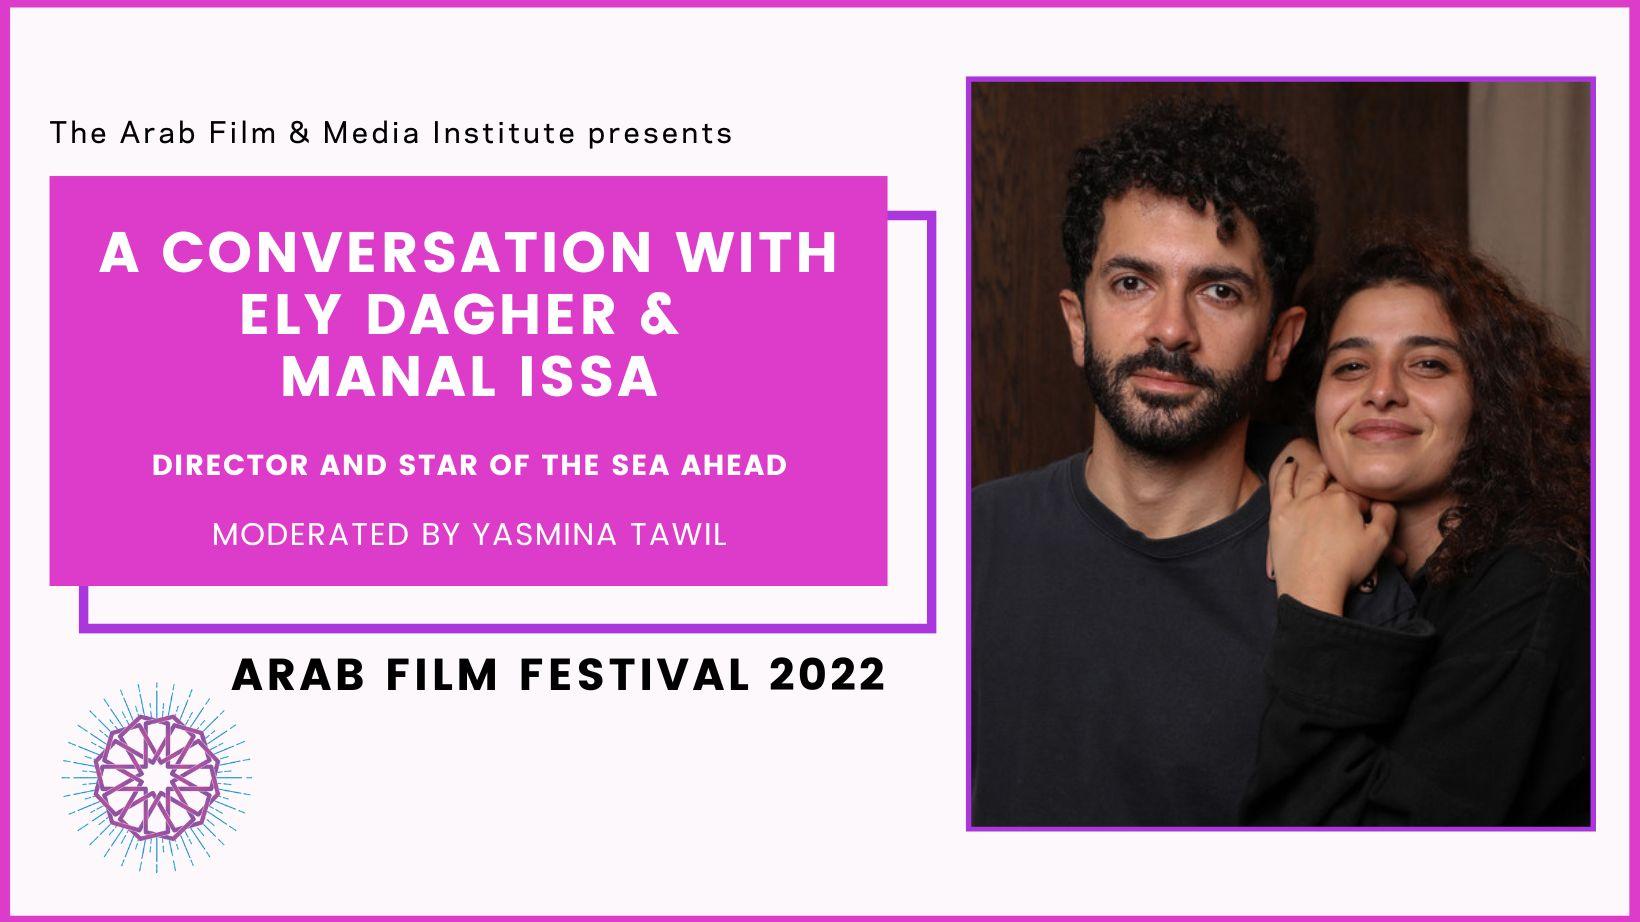 A Conversation with Ely Dagher & Manal Issa